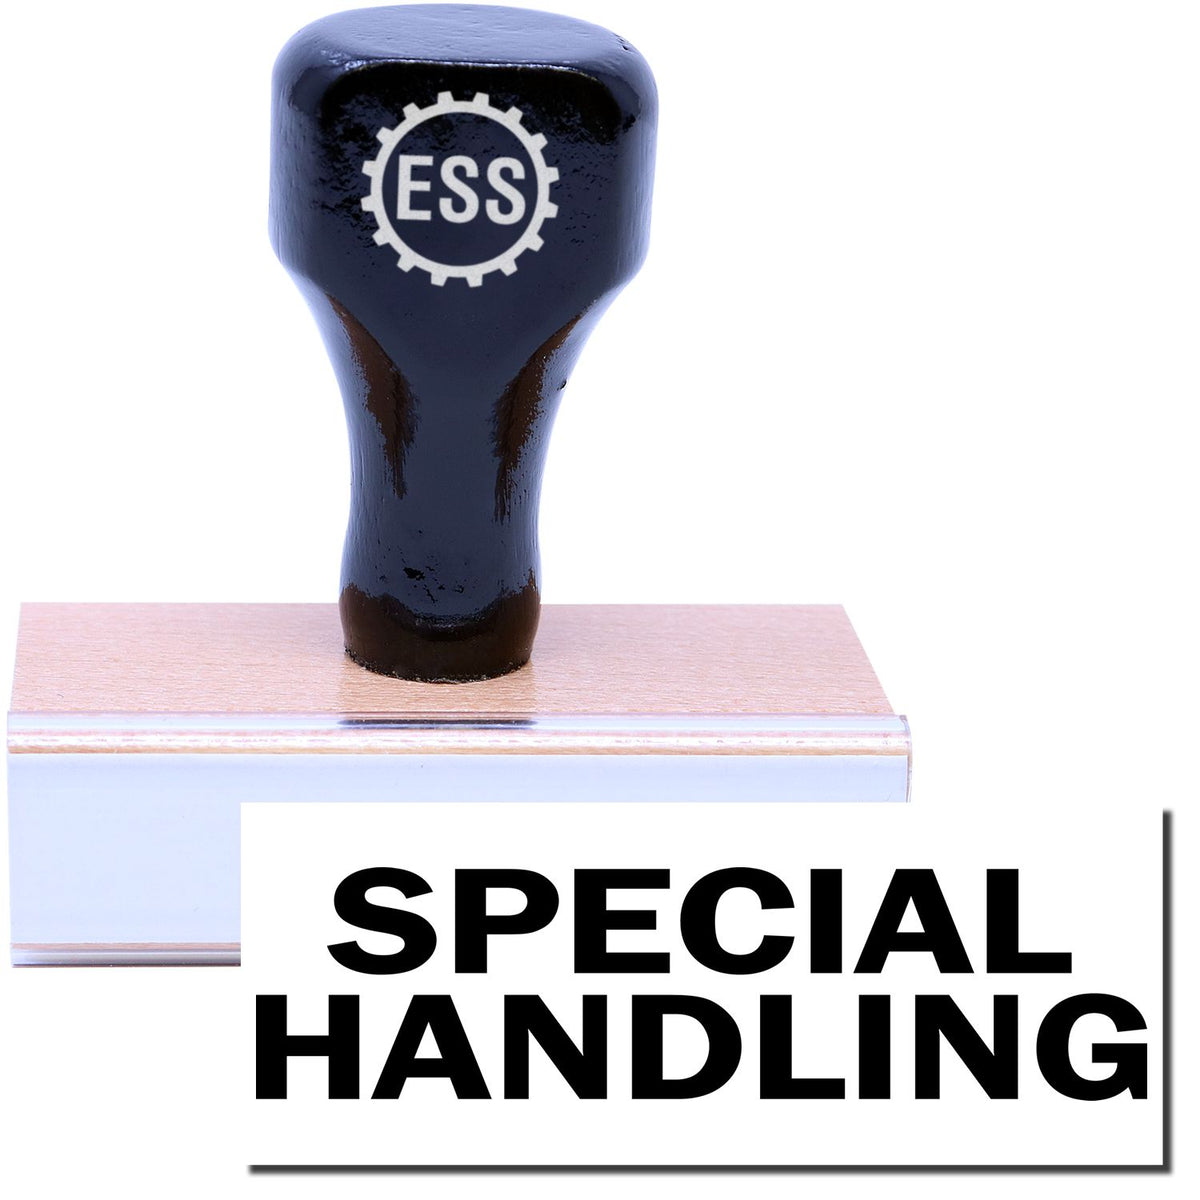 A stock office rubber stamp with a stamped image showing how the text &quot;SPECIAL HANDLING&quot; is displayed after stamping.